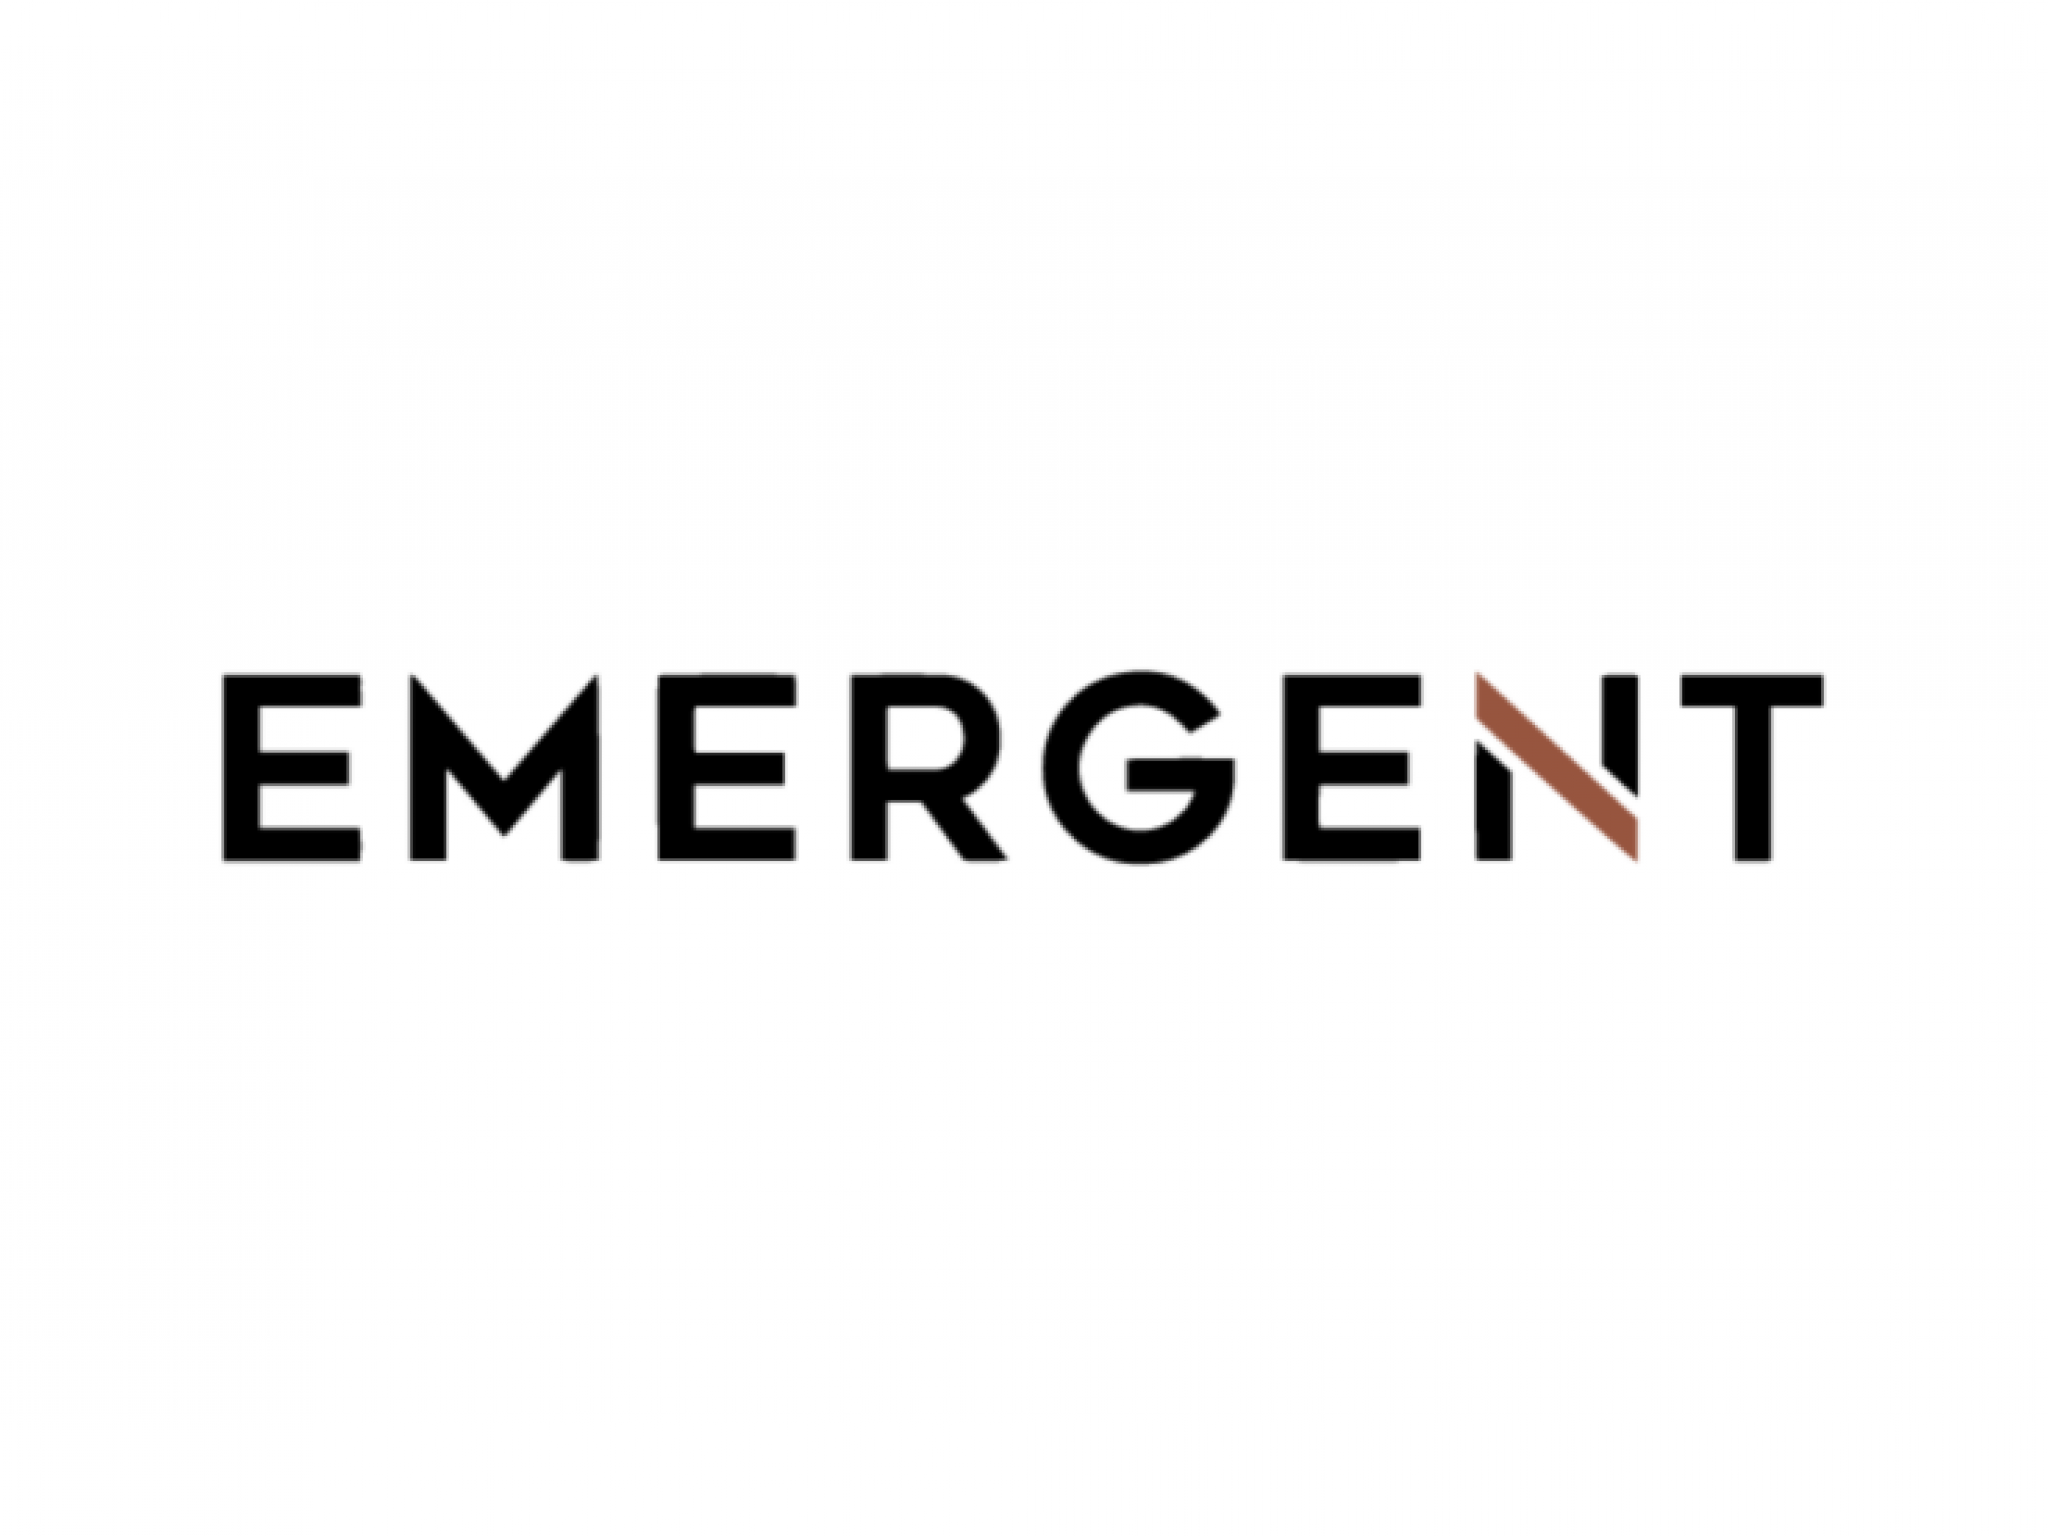  whats-going-on-emergent-biosolutions-shares-today 